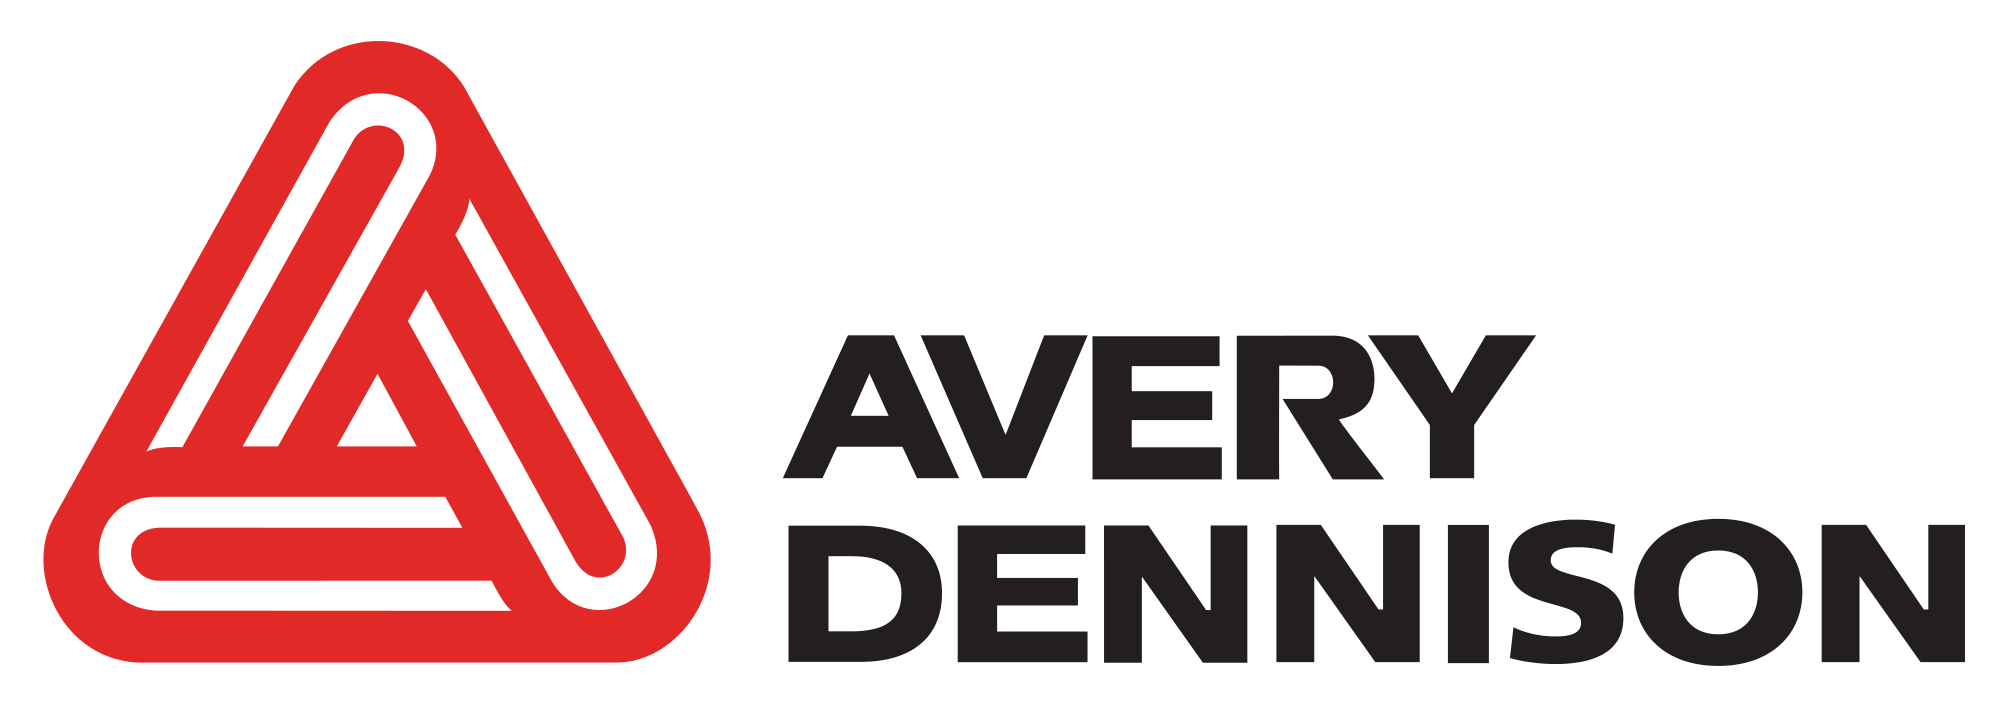 Avery Dennison PNG - 114738